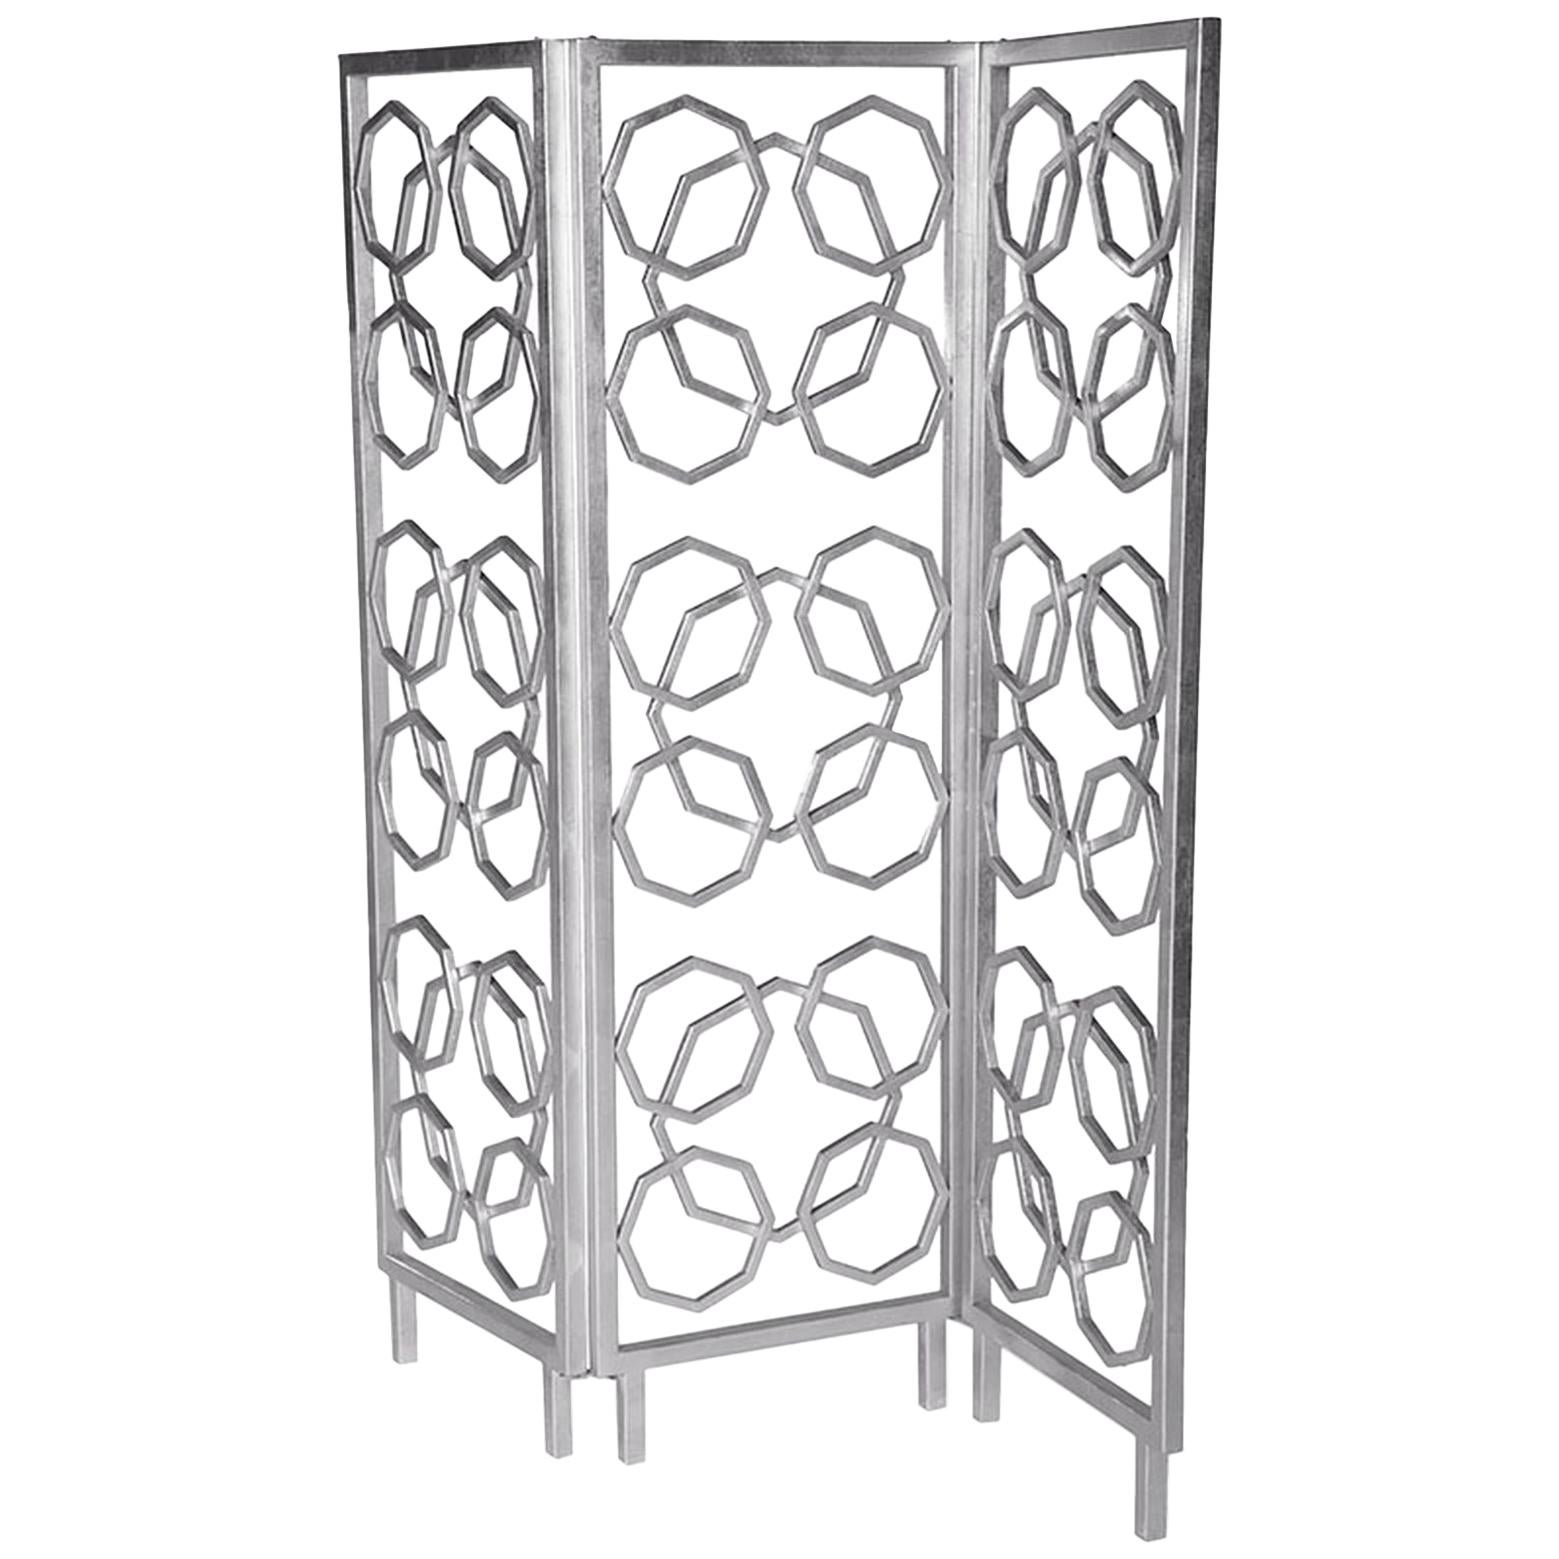 Casablanca Room Screen in Silver by Innova Luxuxy Group For Sale